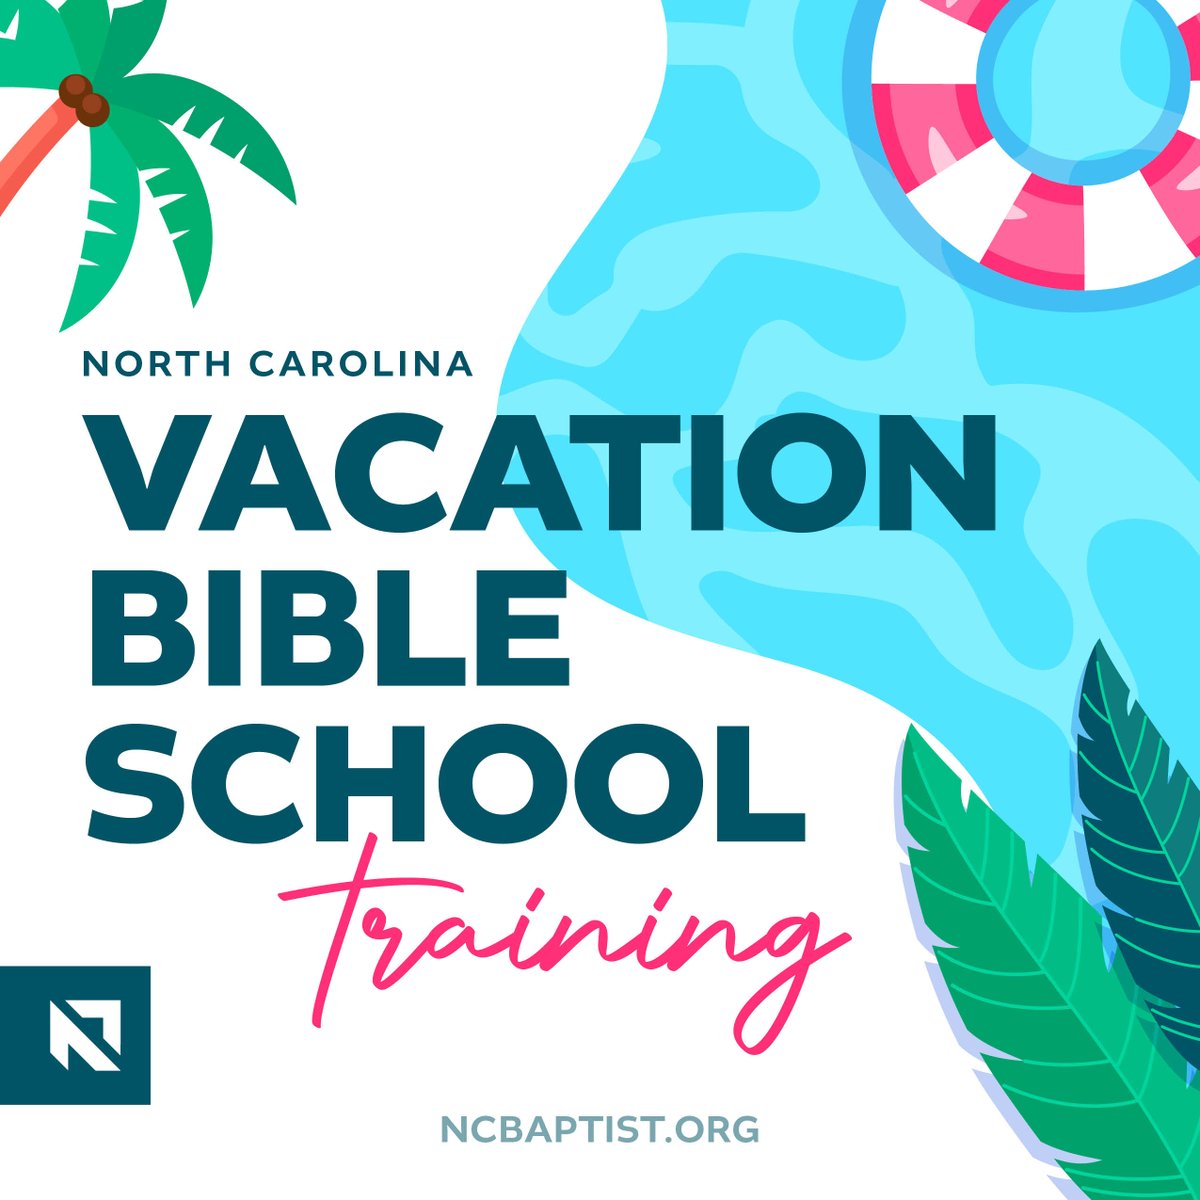 Get ready for #VBS2024 by attending one of the regional VBS trainings offered by the North Carolina VBS Training Team. 👋 Connect with others 🤝 Develop relationships with your team 🏖️ Learn decorating techniques & more View upcoming trainings at ncbaptist.org/vbstraining.